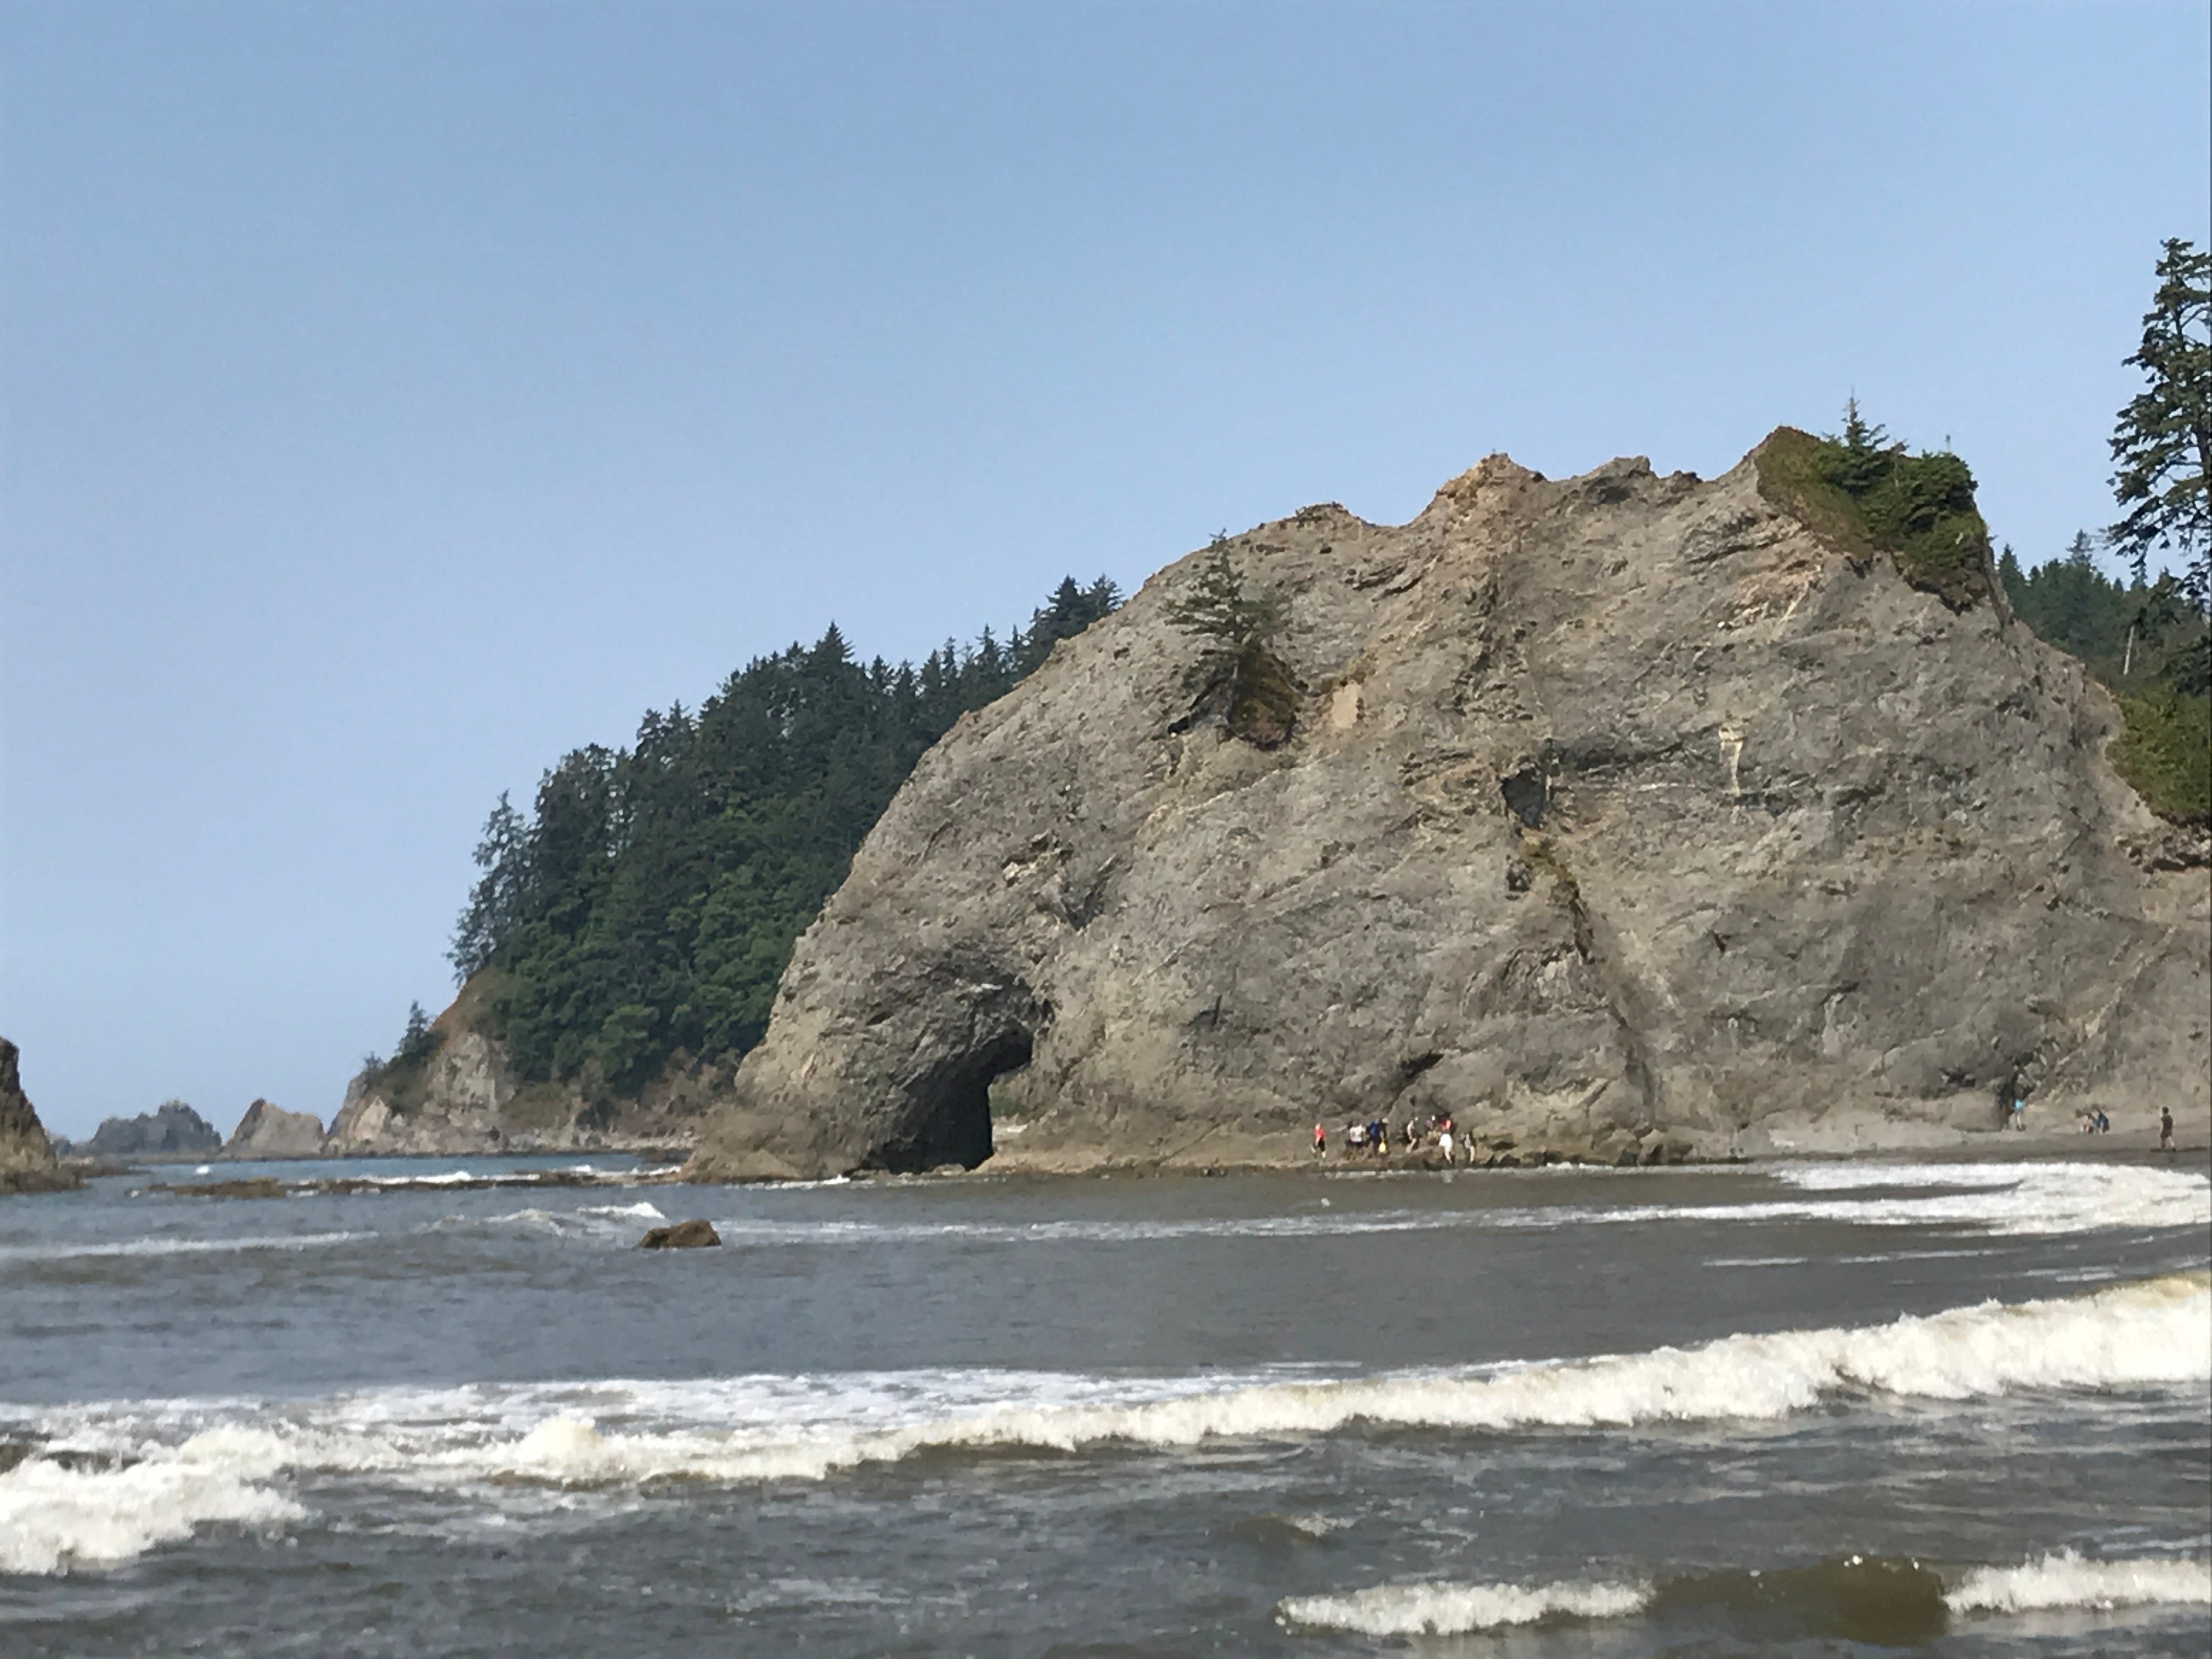 A view of hole in the wall from down the beach.